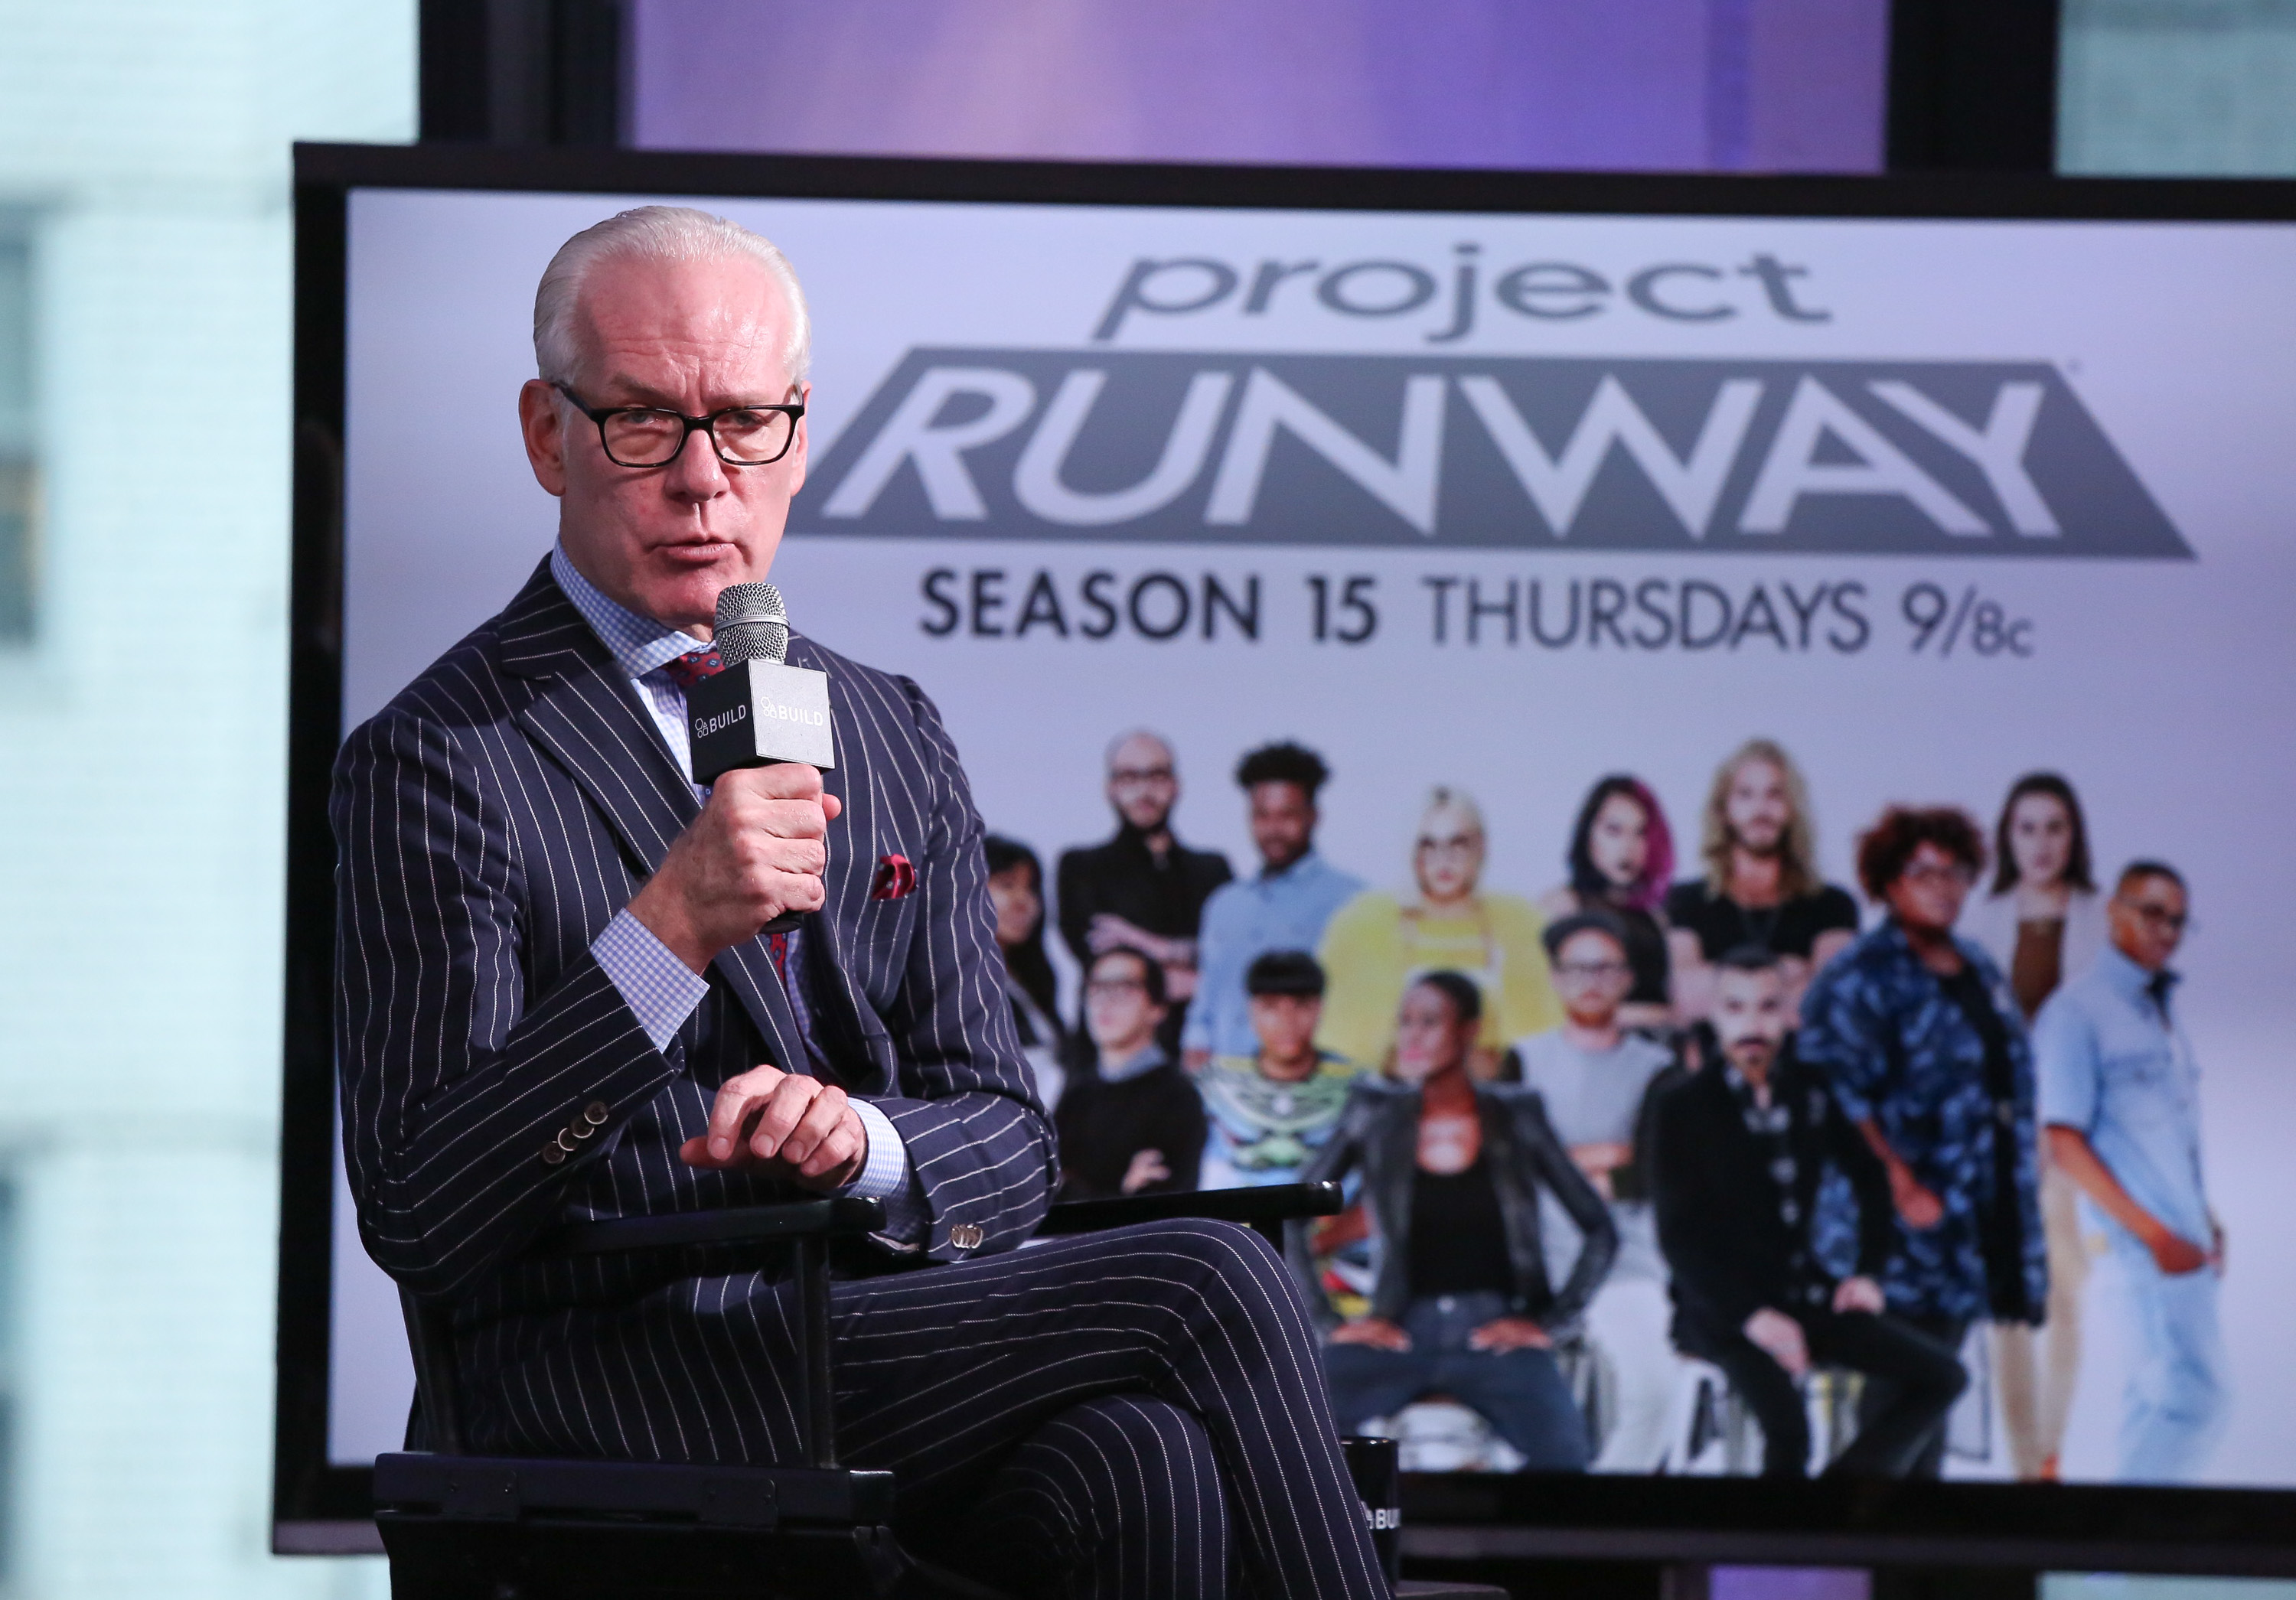 Tim Gunn on Project Runway in New York in 2016 | Source: Getty Images